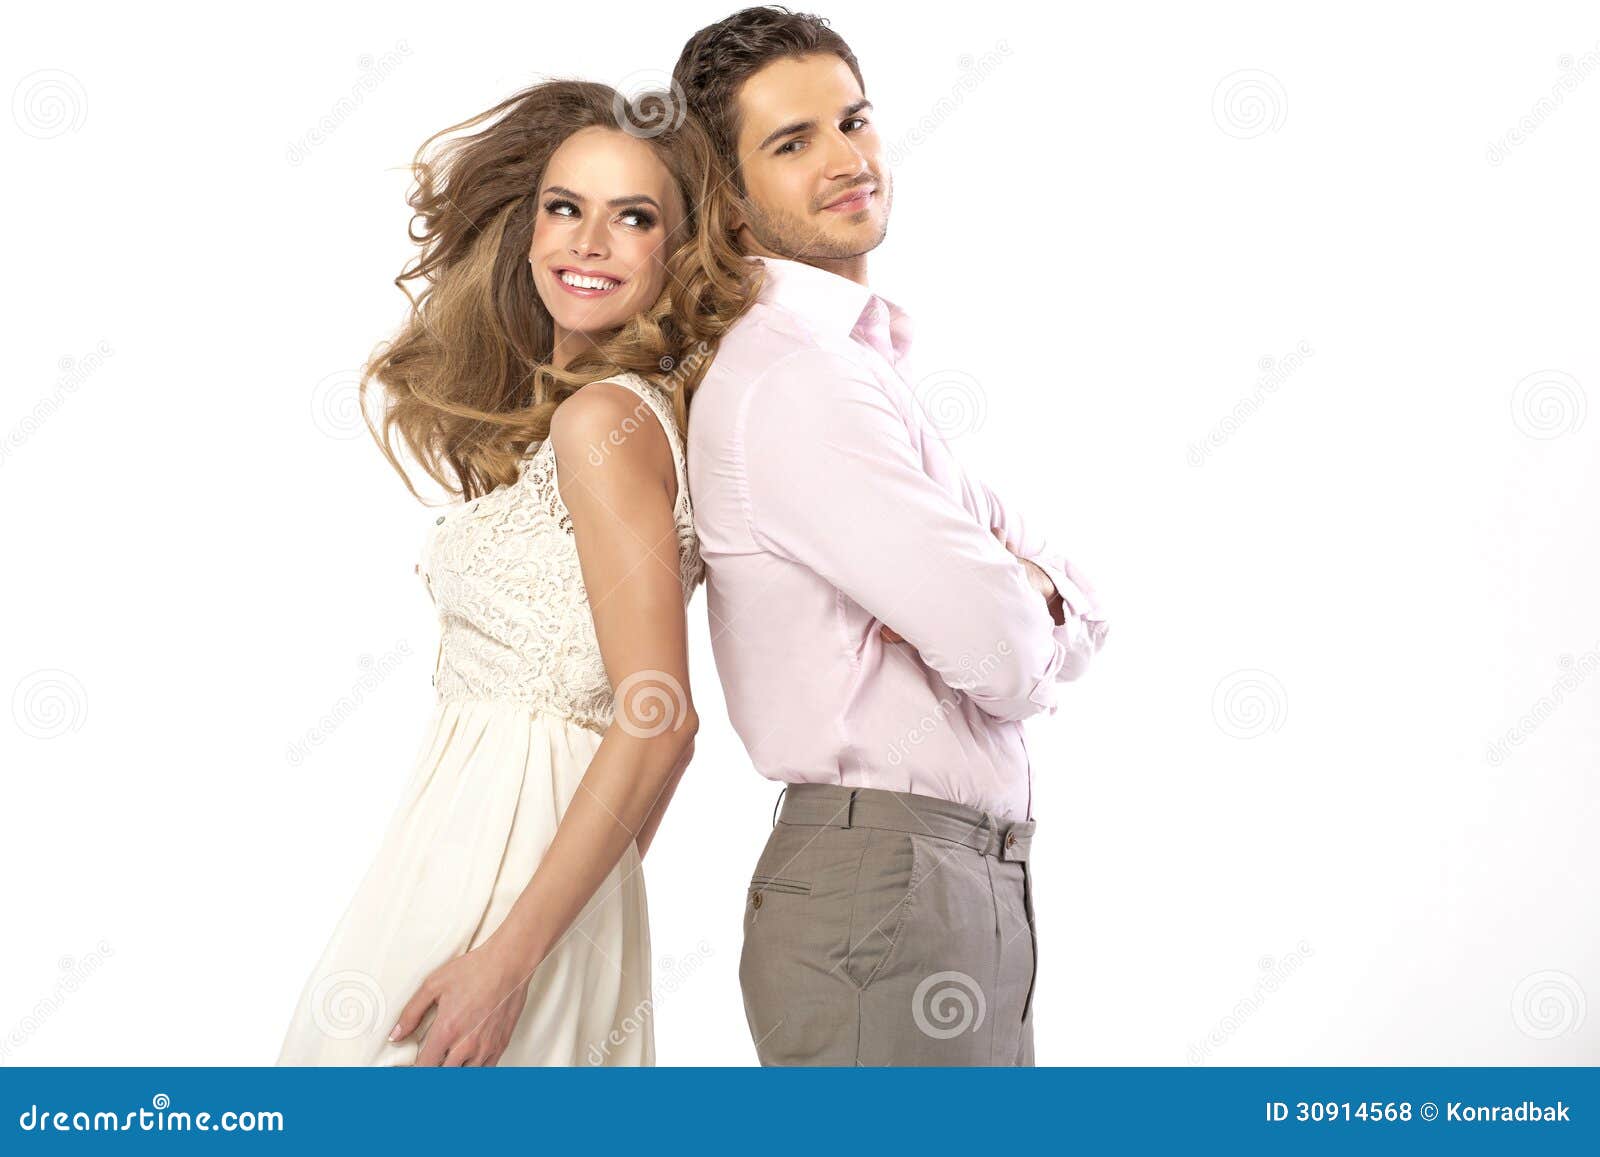 52 Best Couple Poses for Portrait Photography